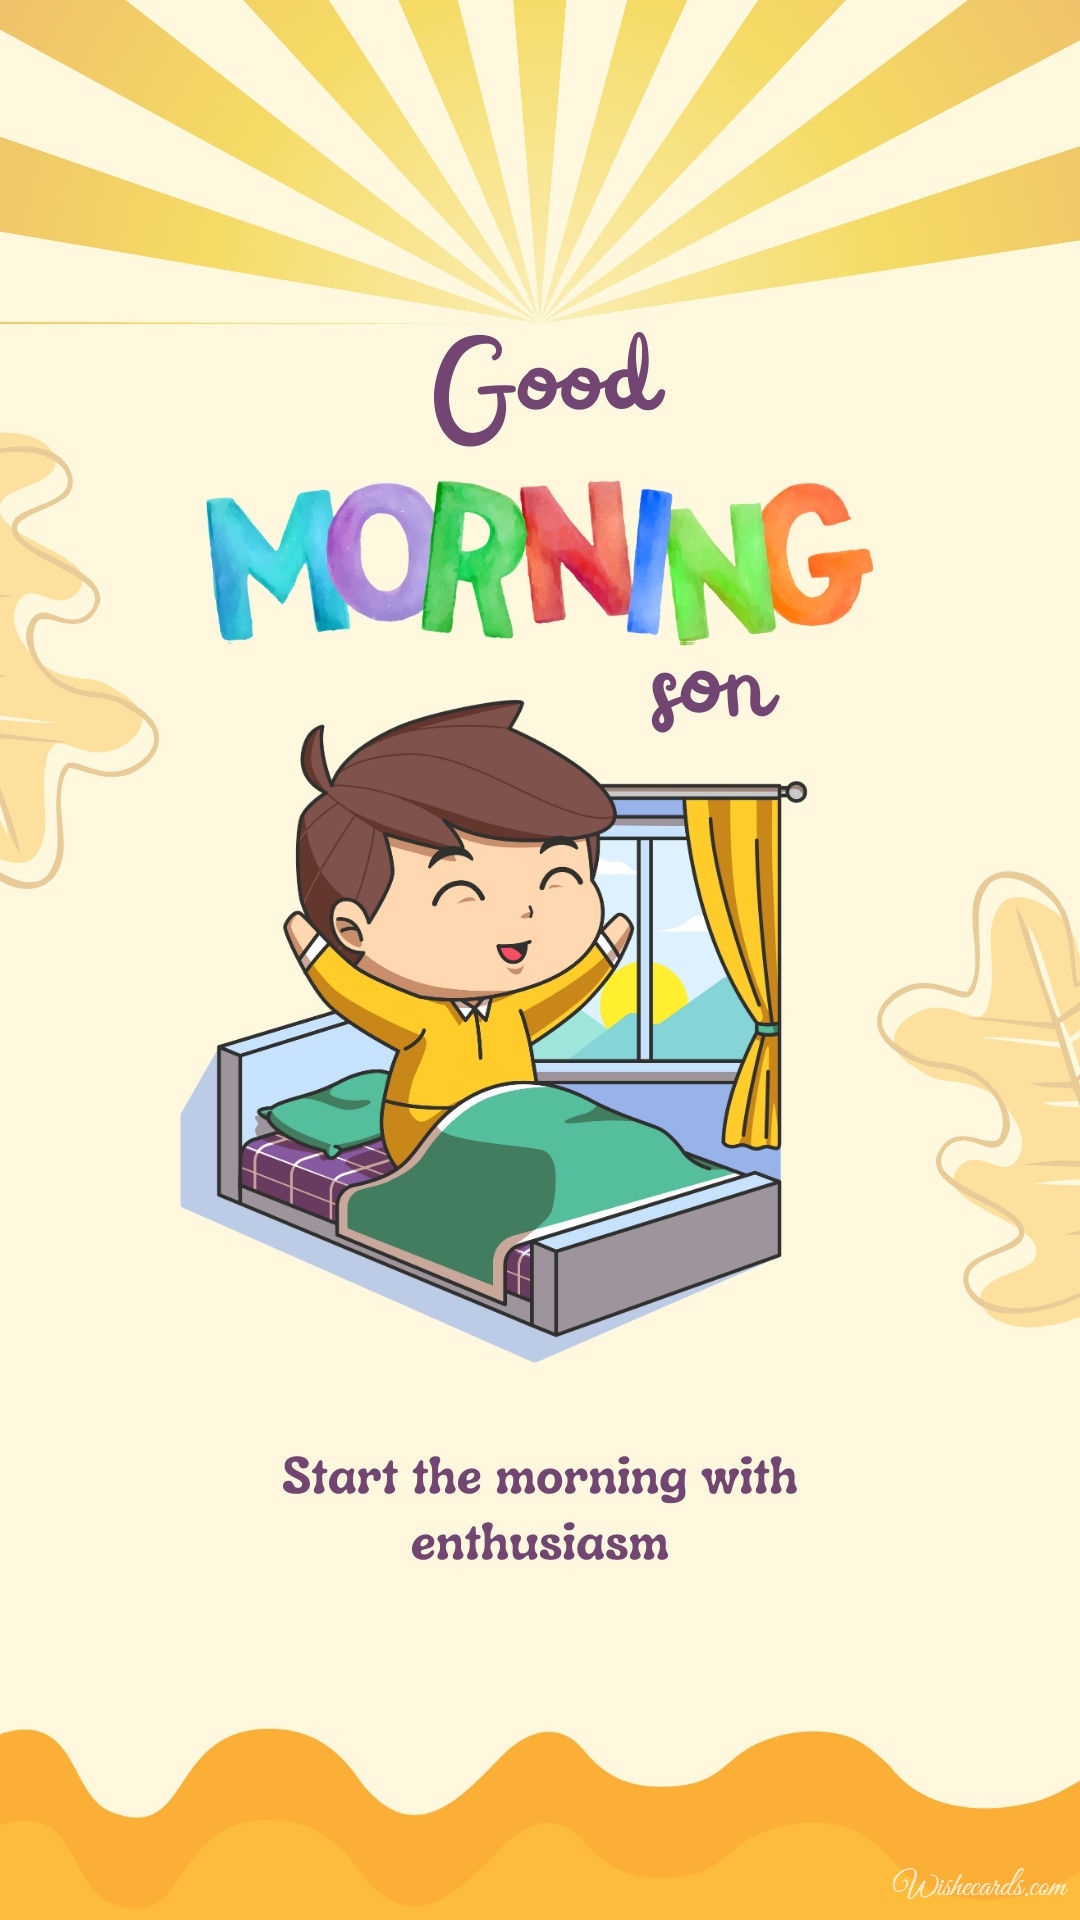 Good Morning for Son Images